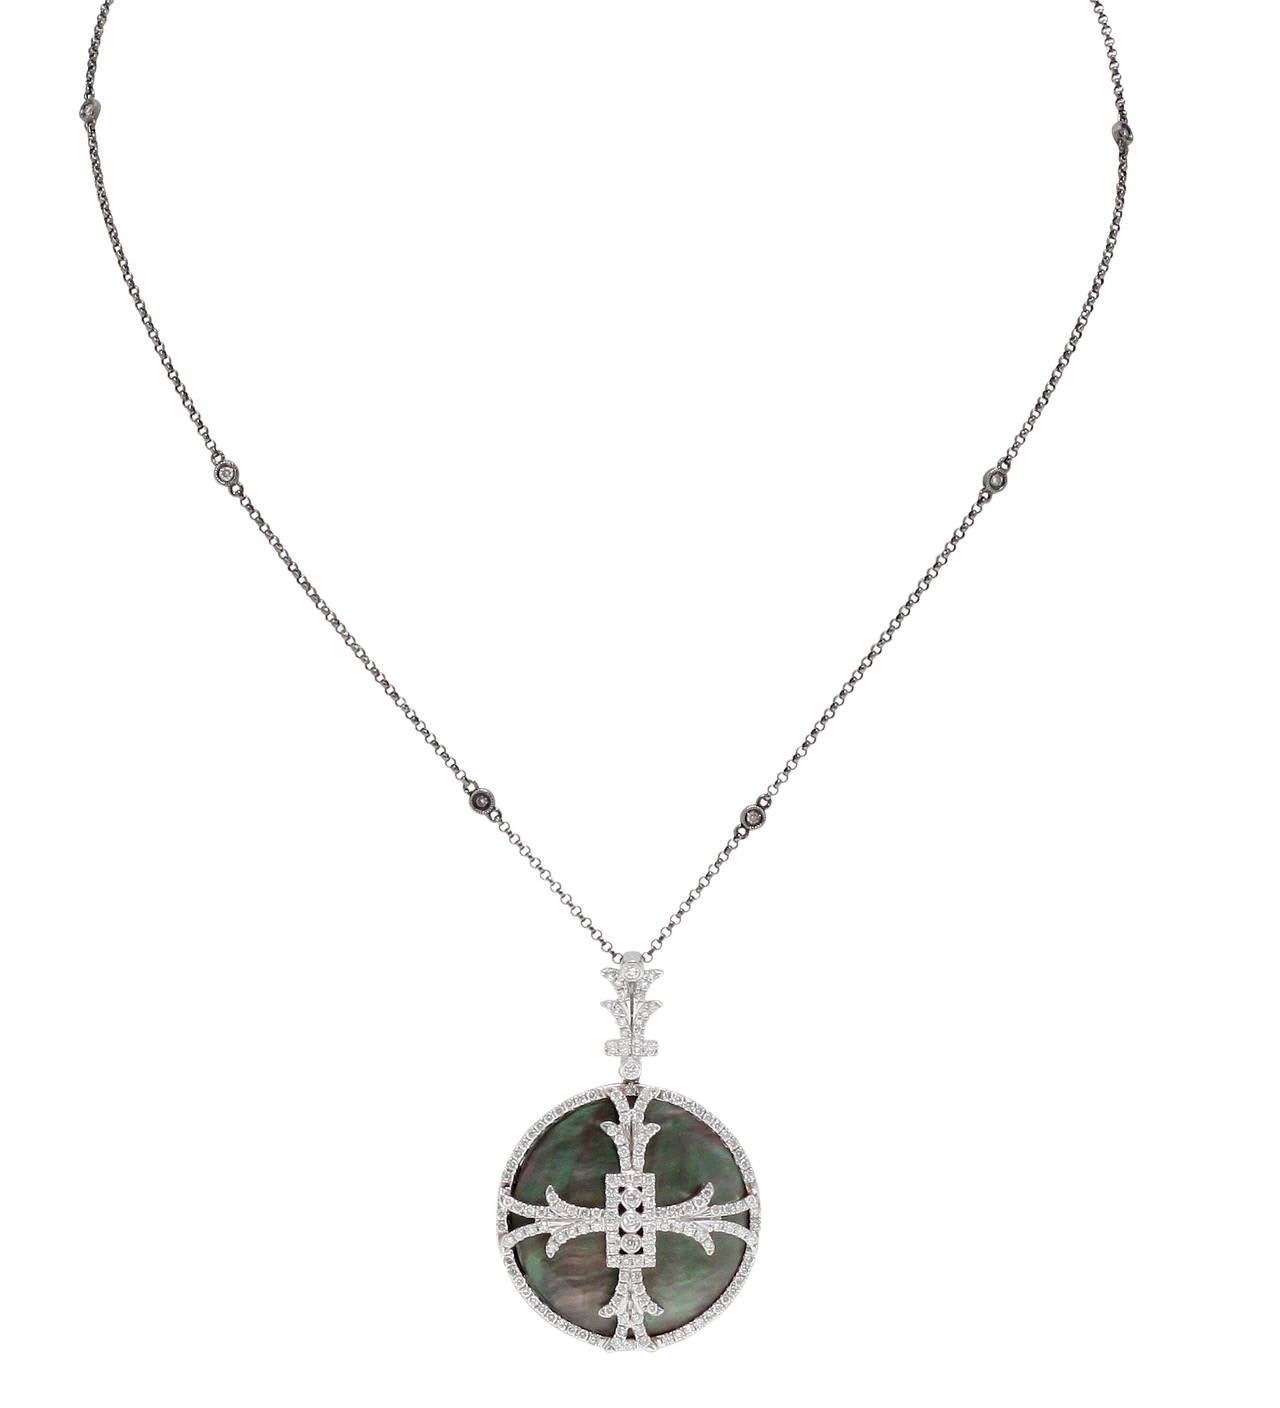 Burdeen's Unique Mother-of-Pearl Diamond Gold Cross Pendant Necklace In New Condition For Sale In Buffalo Grove, IL